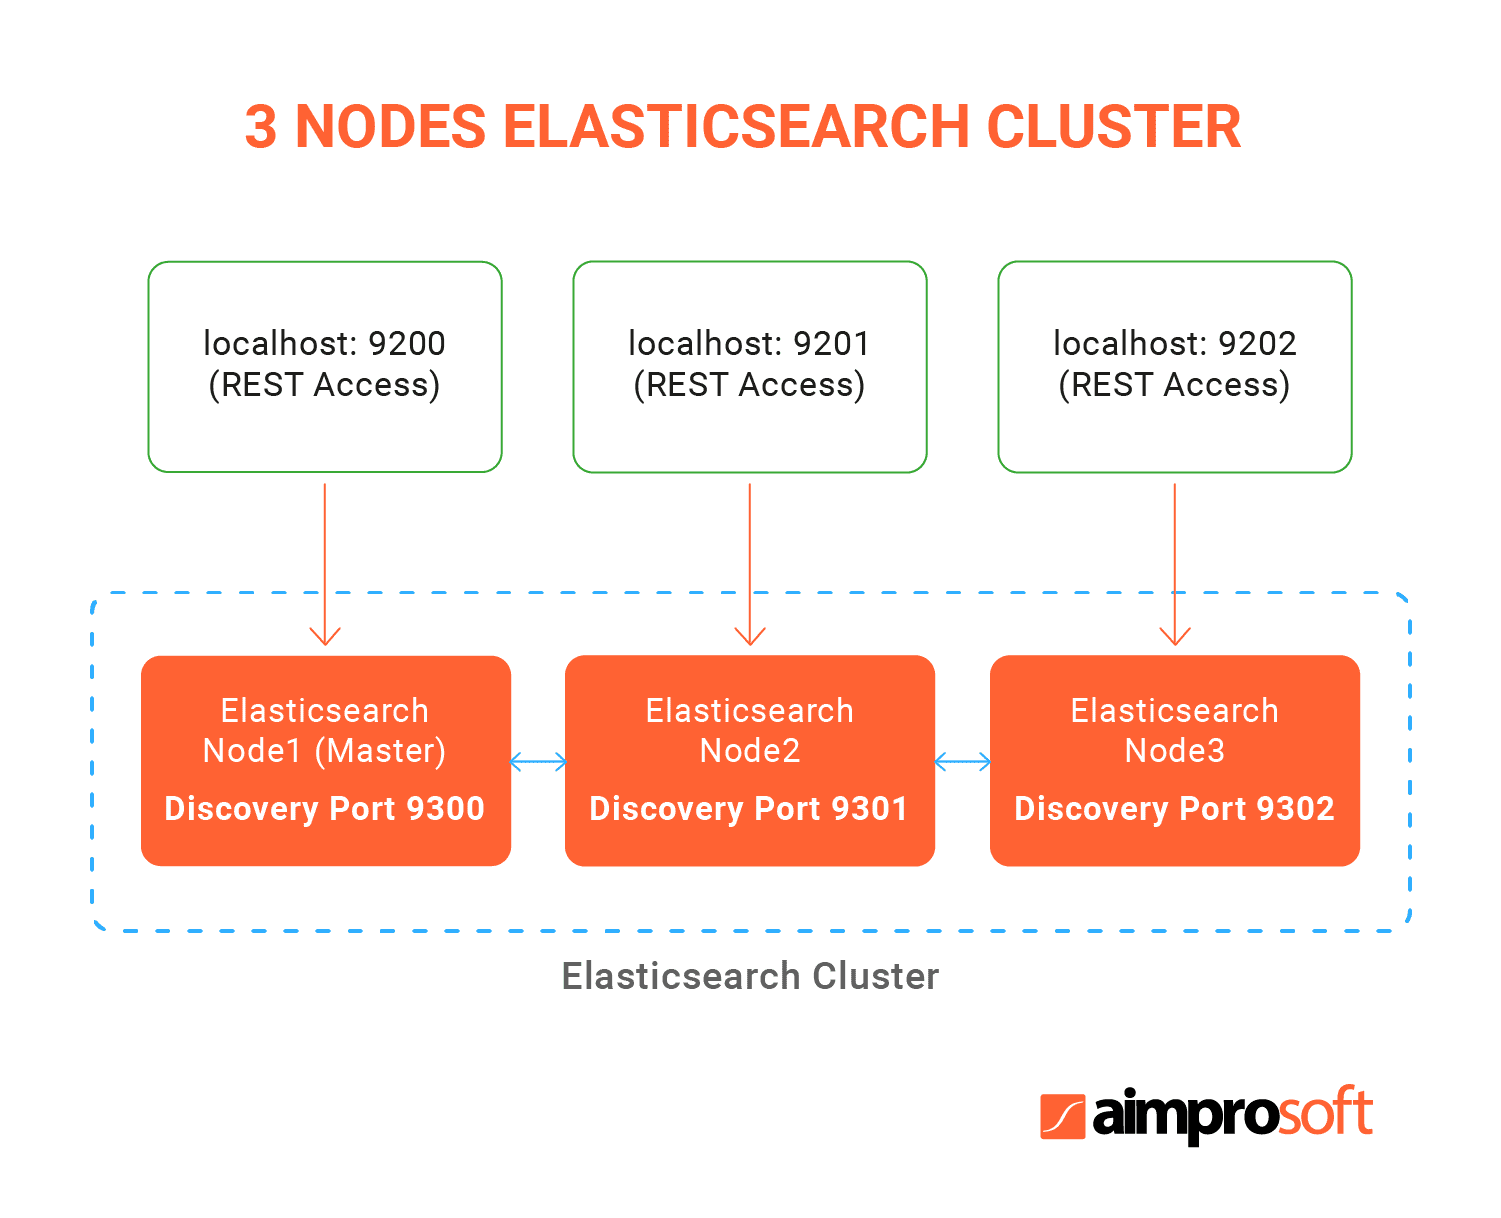 3 nodes Elasticsearch cluster that can be used in Liferay projects